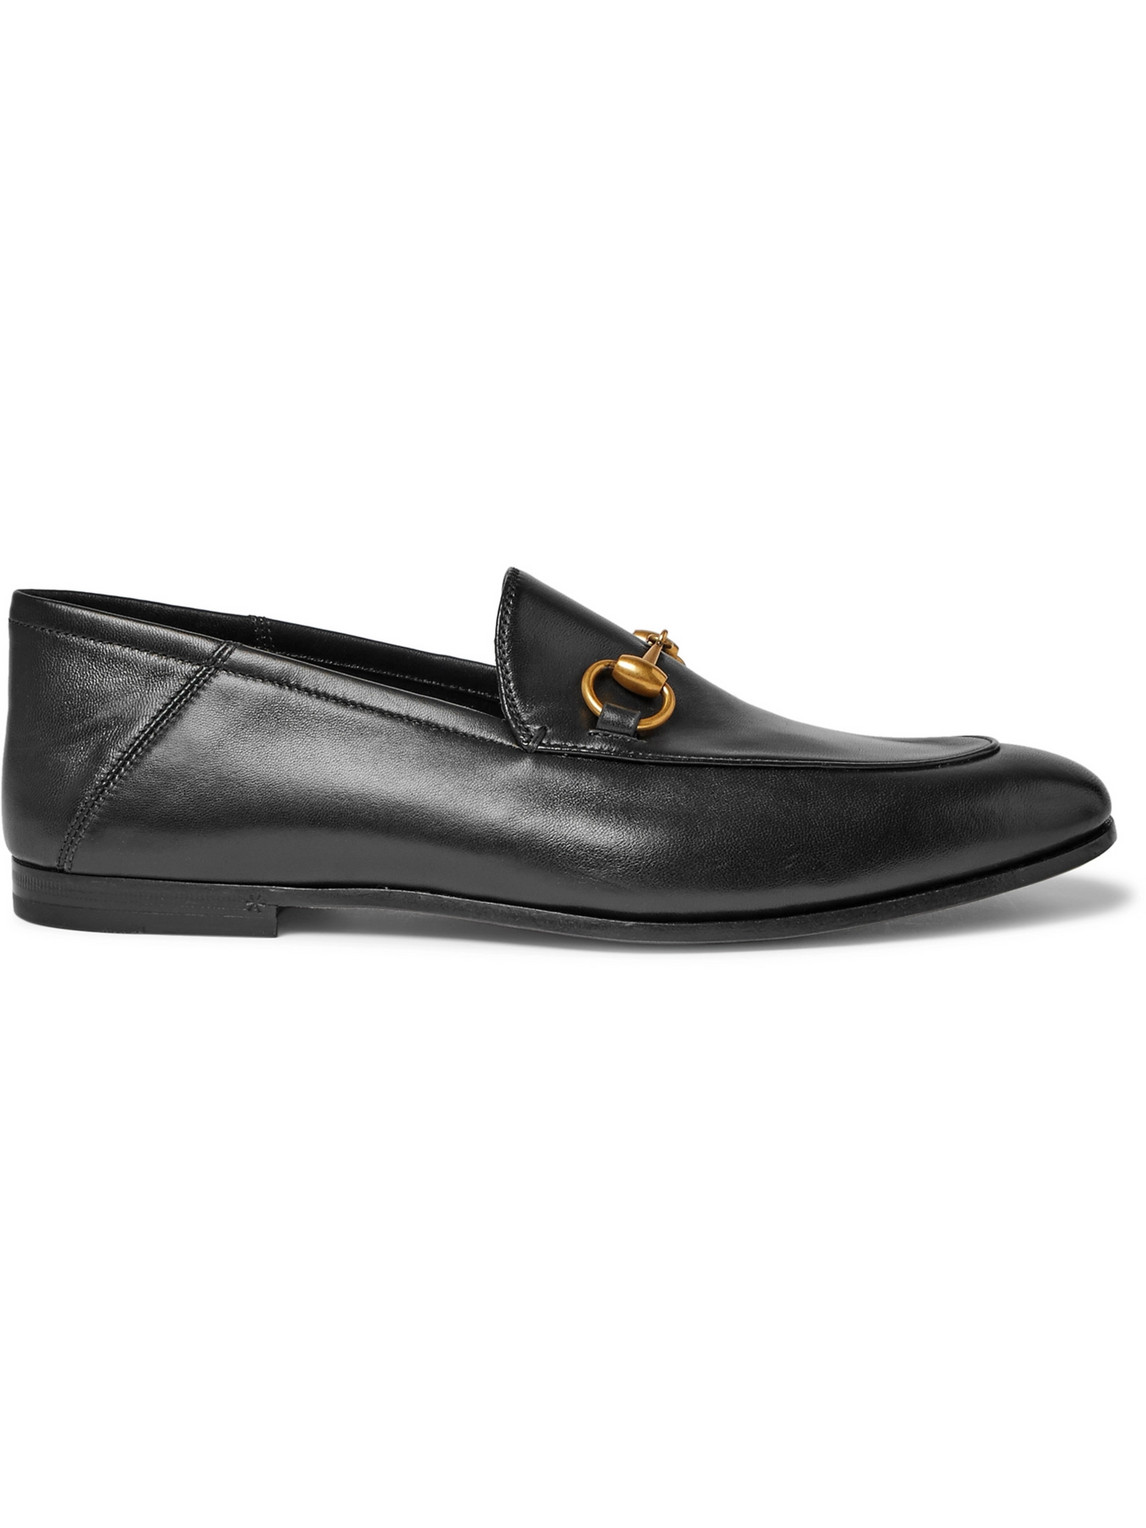 Brixton Horsebit Collapsible-Heel Leather Loafers